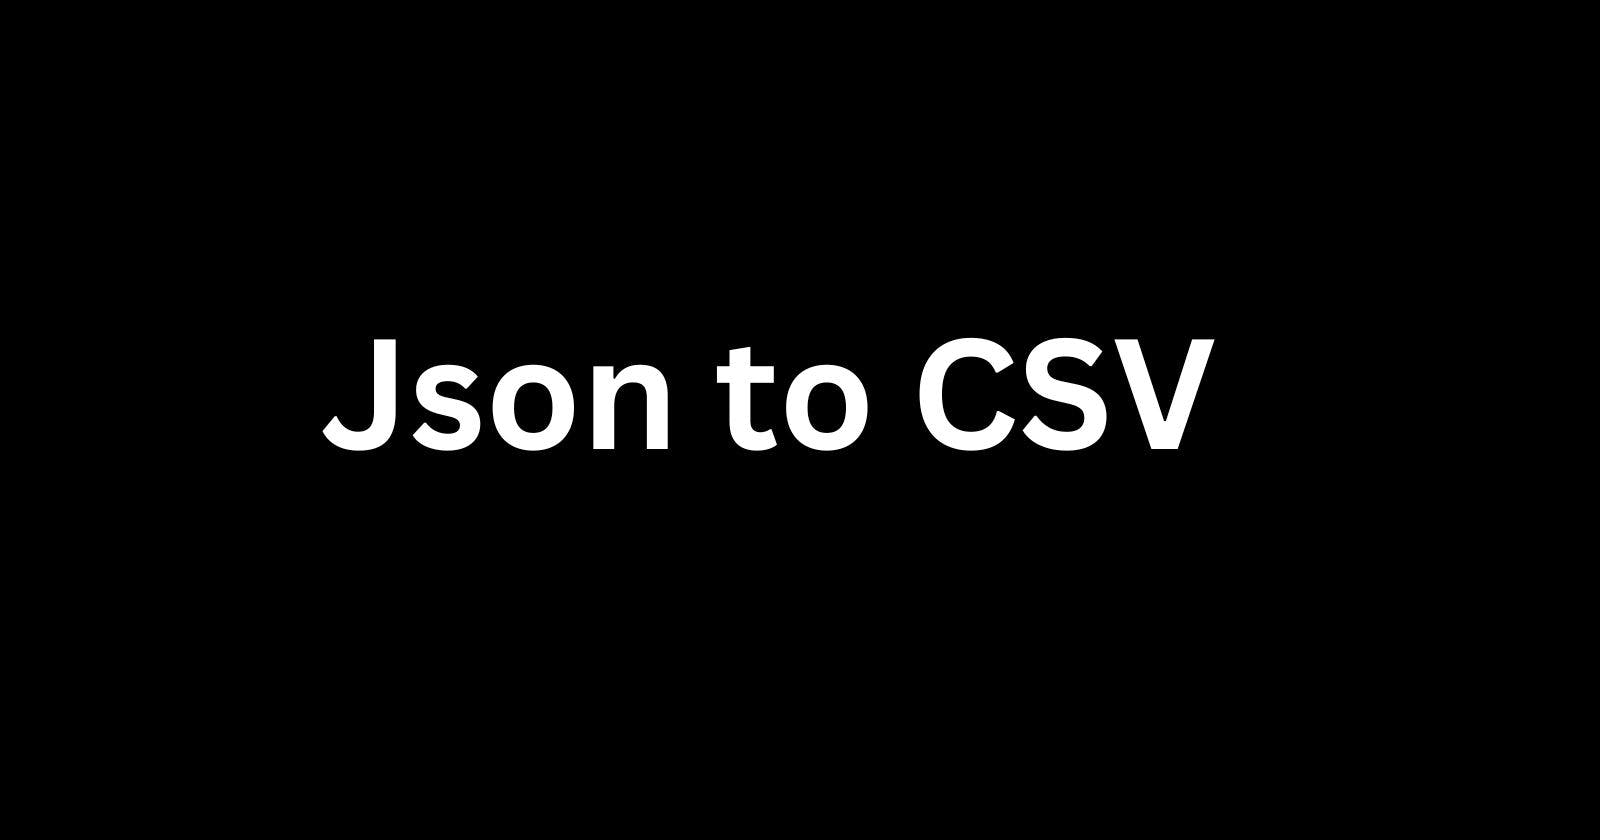 Converting JSON to CSV on Linux